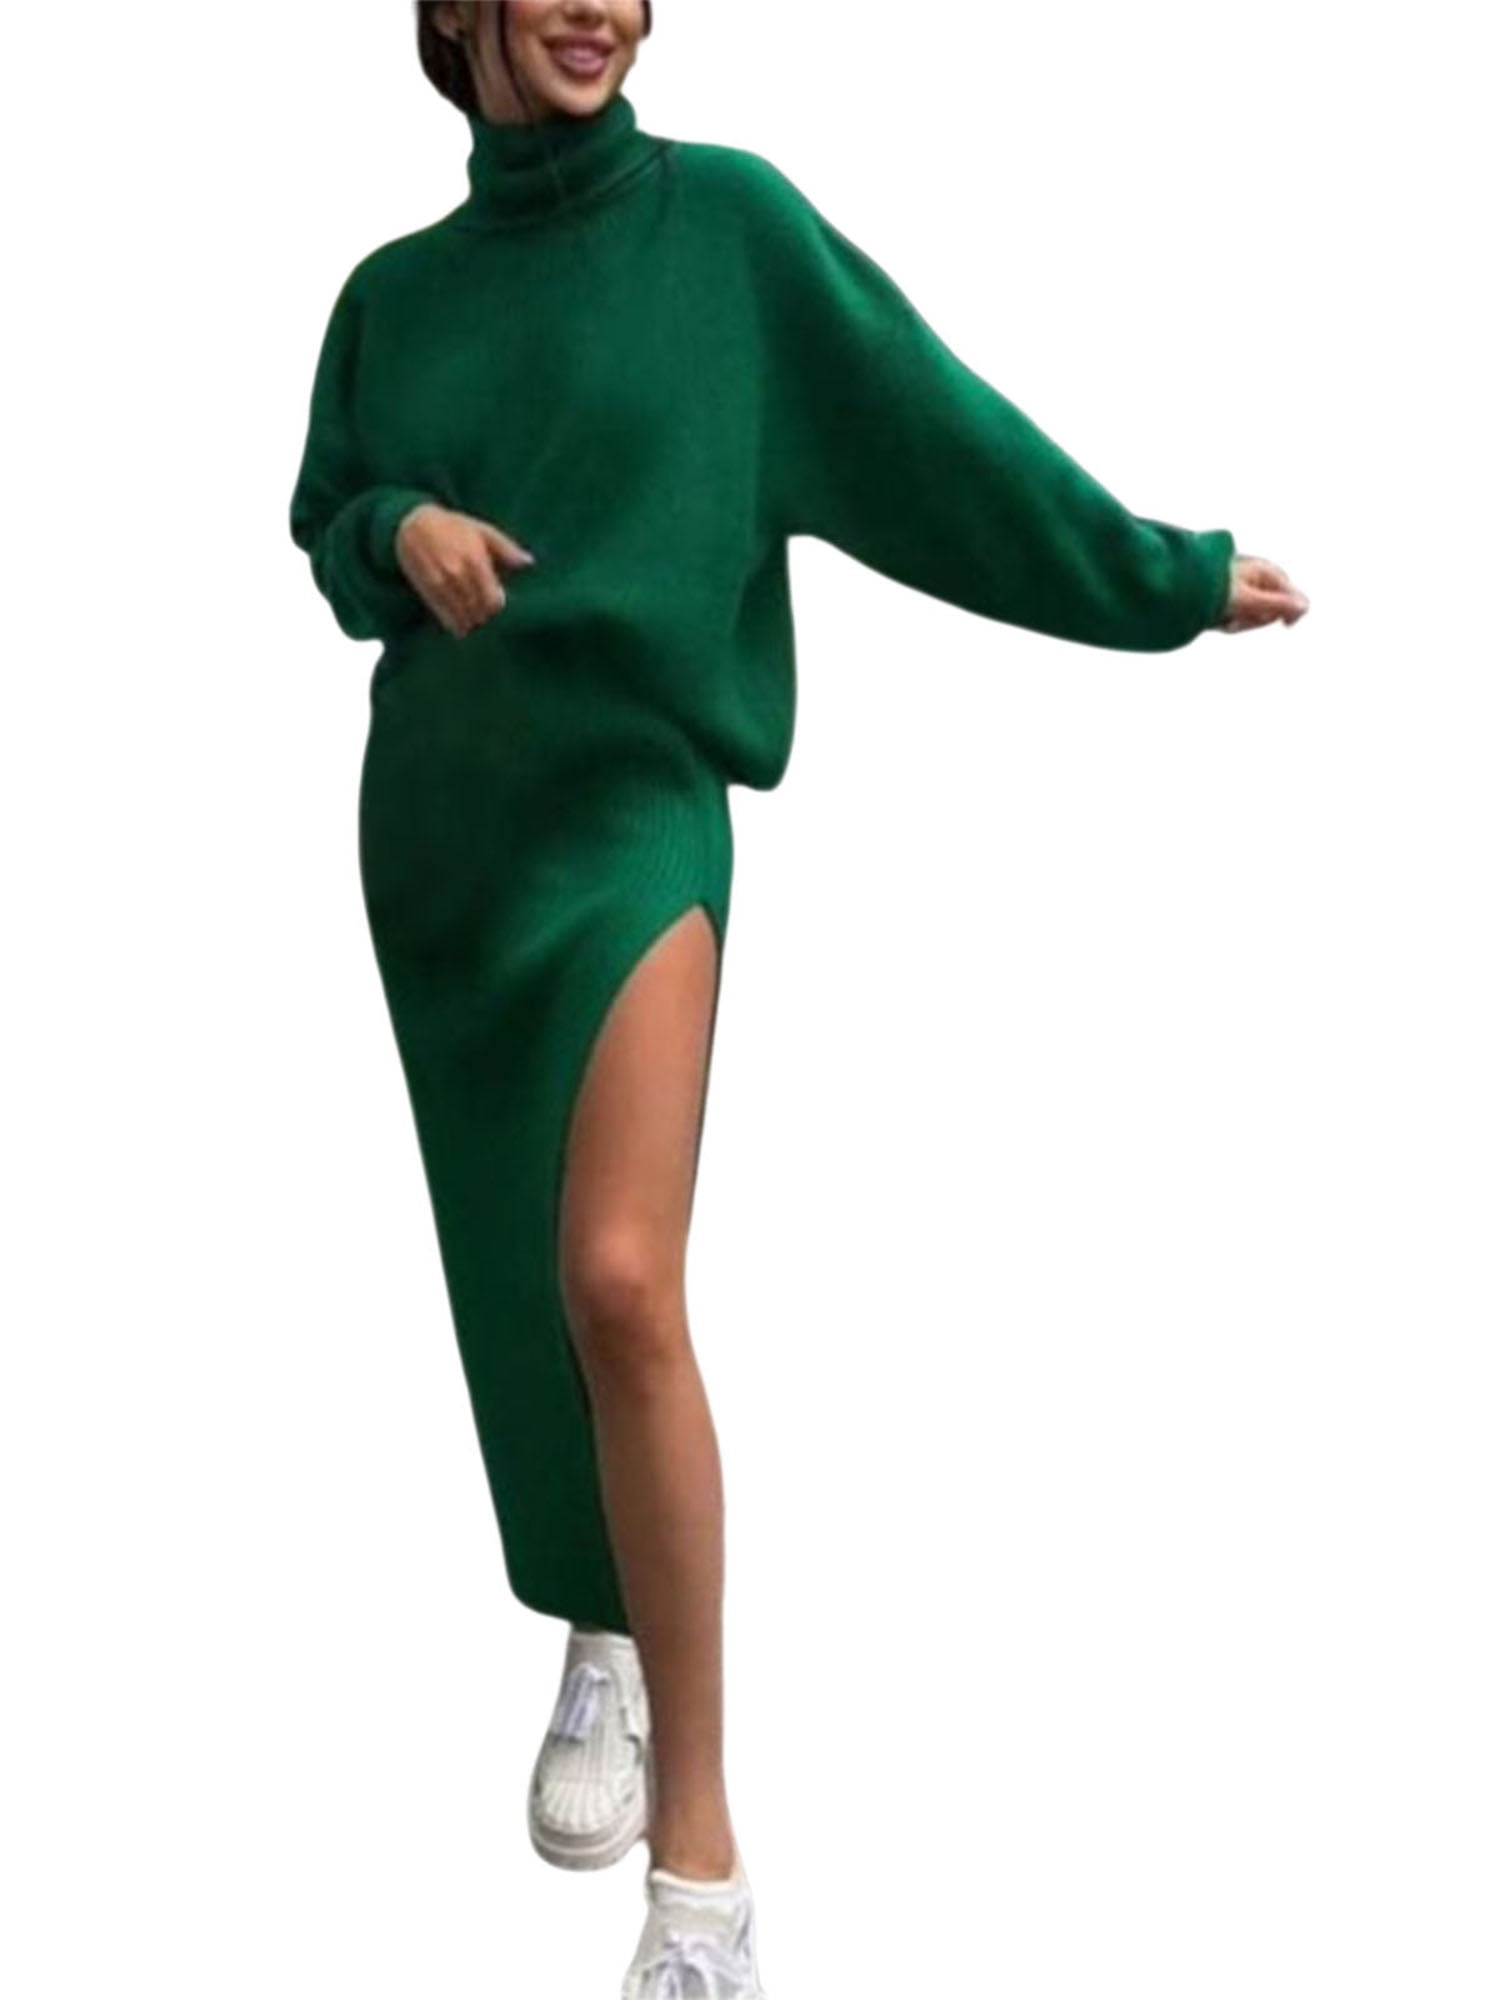 JYYYBF Women's Elegant Knitted Dress Sets 2 Piece Solid High Collar Long  Sleeve Sweater + High Split Midi Skirts Outfits Green L